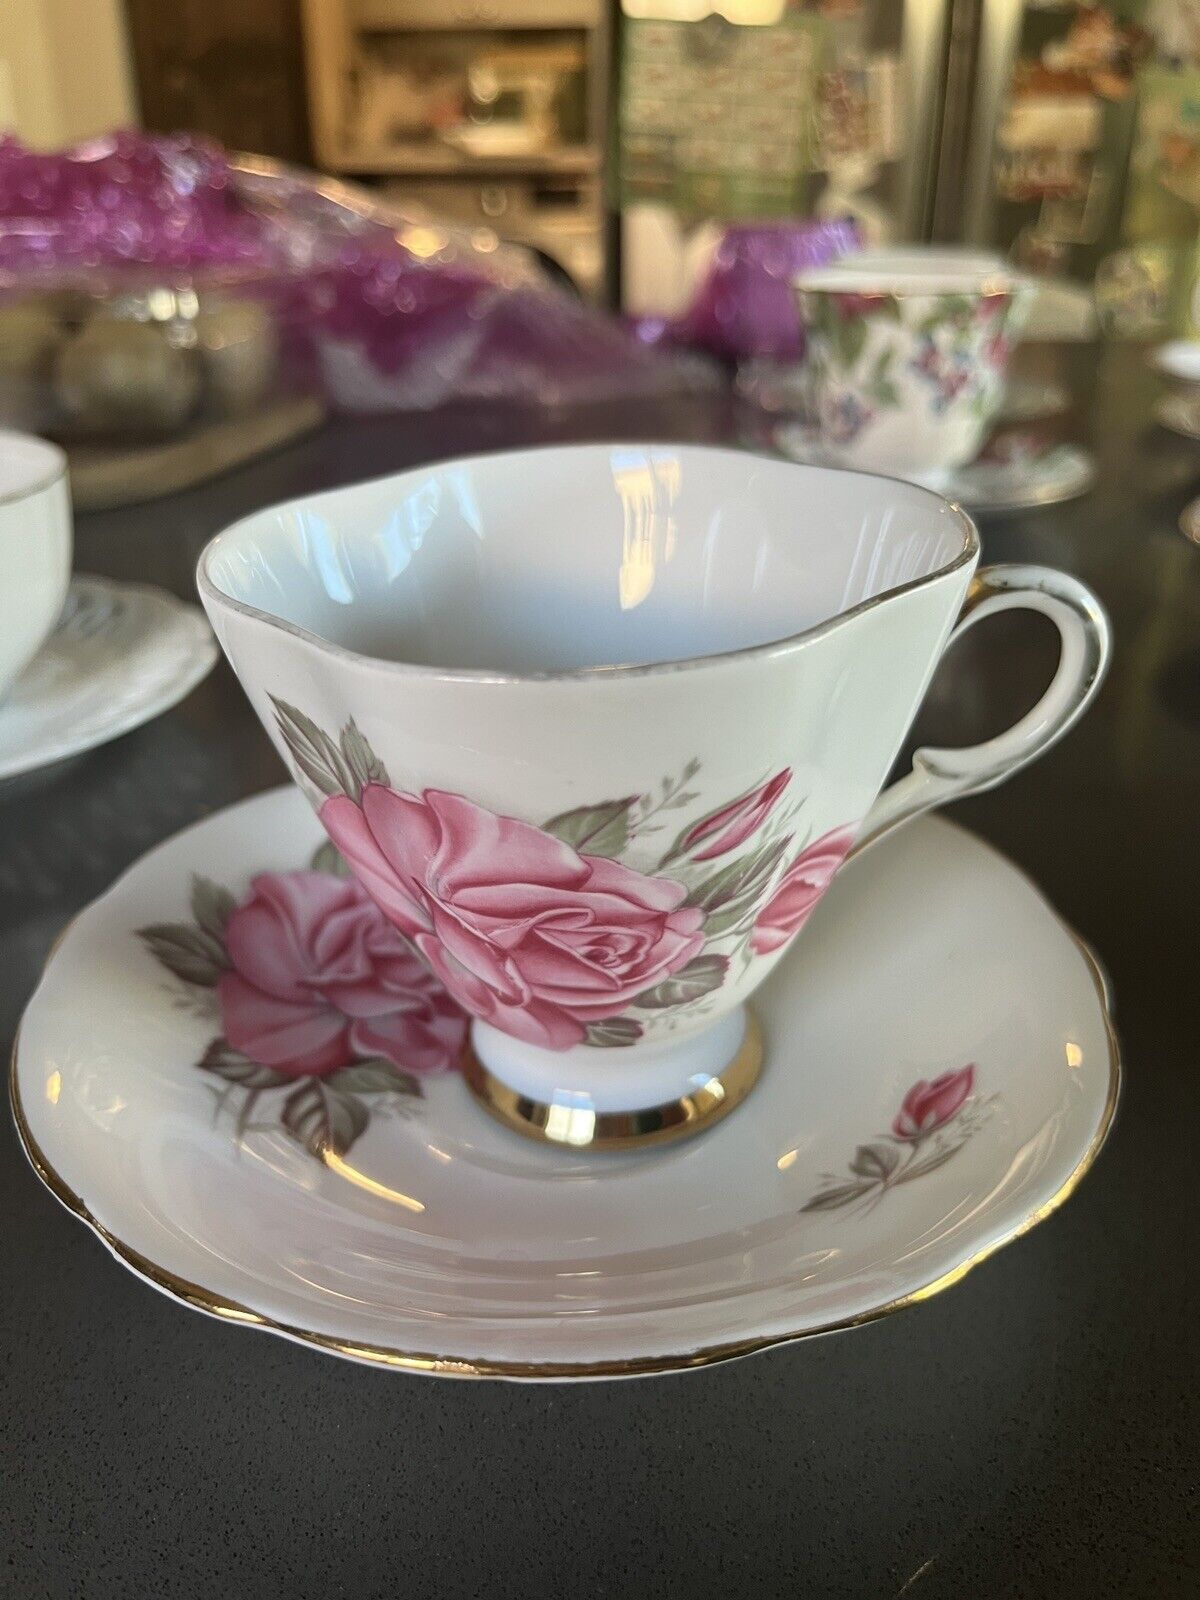 VTG Clarence Bone China Footed Teacup And Saucer From England Pattern 1611-52